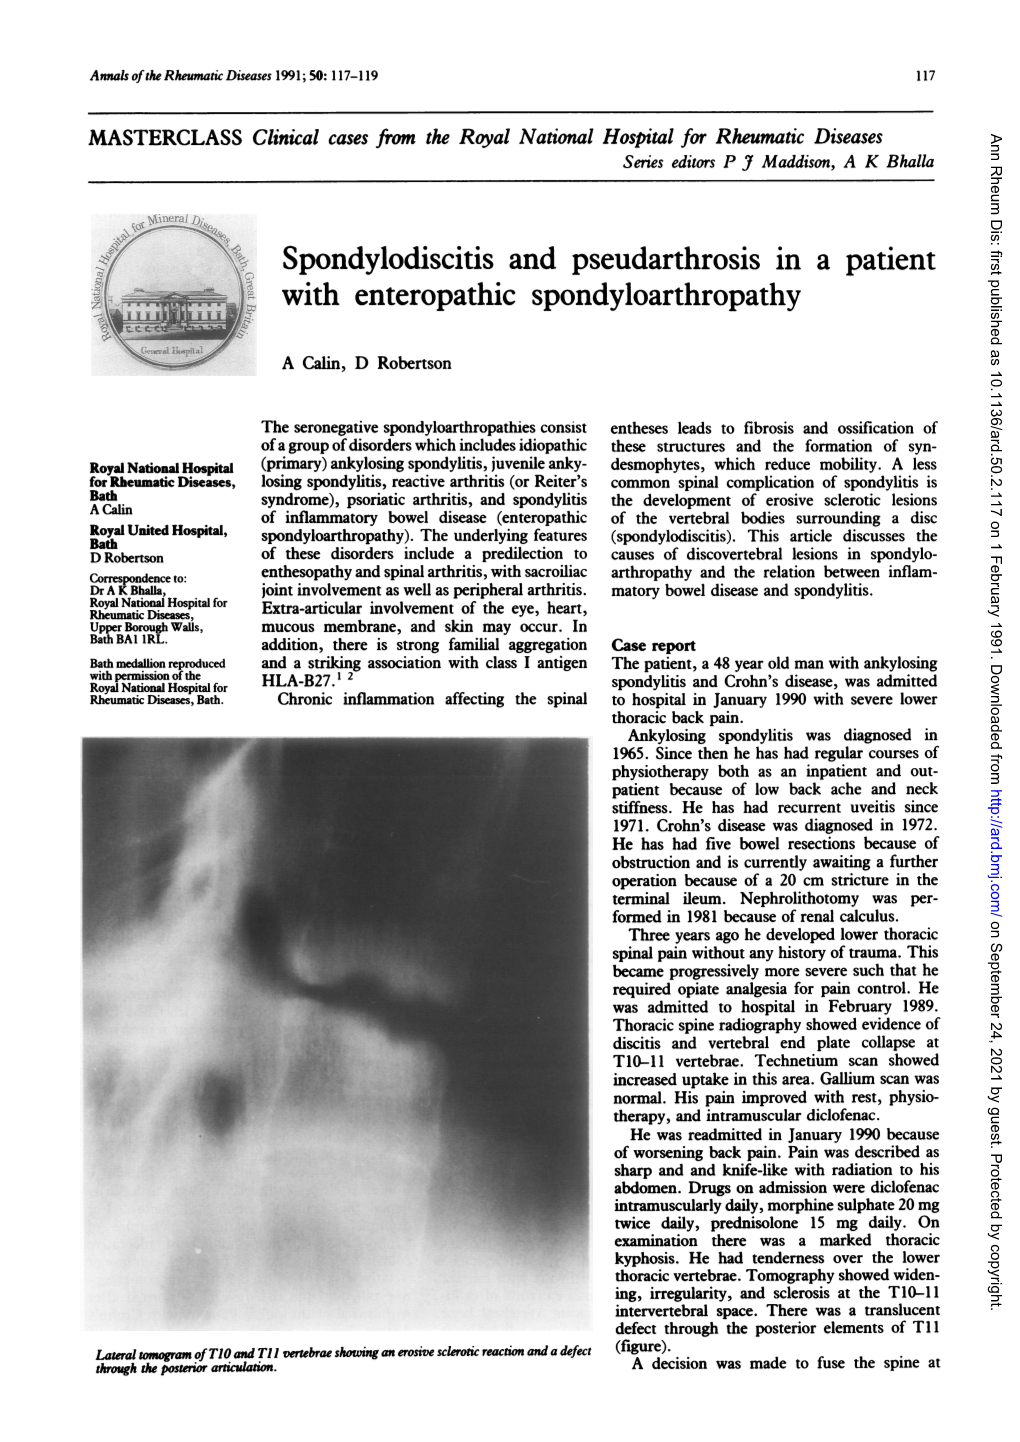 Spondylodiscitis Andpseudarthrosis in a Patient with Enteropathic